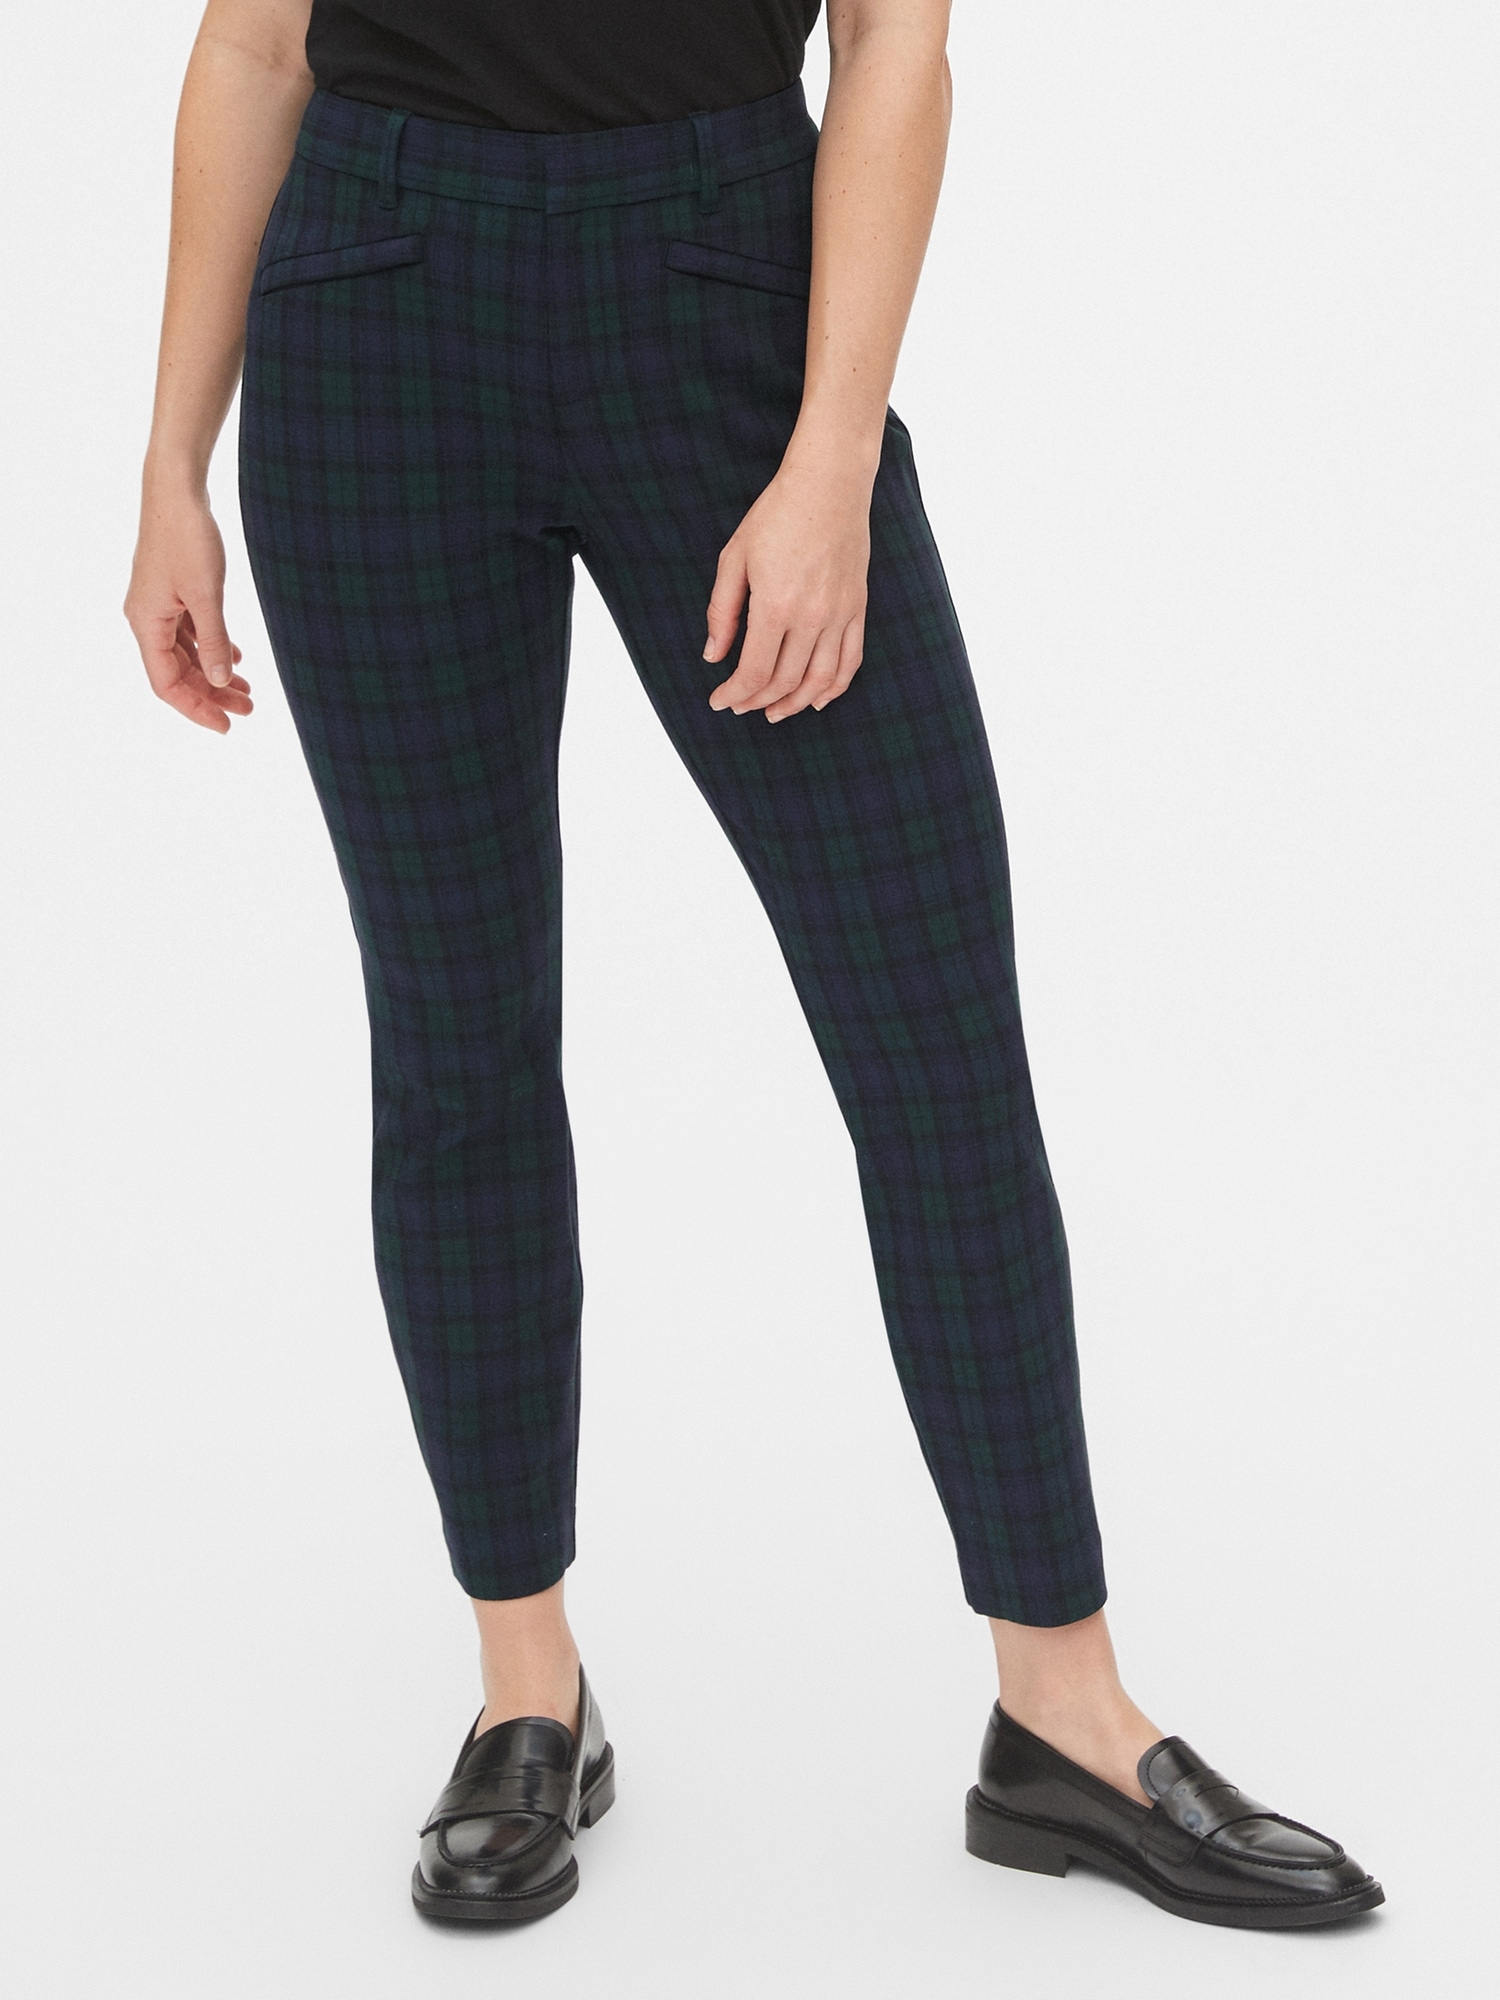 Plaid Back Zip Trousers For $32.97! - Kawaii Stop